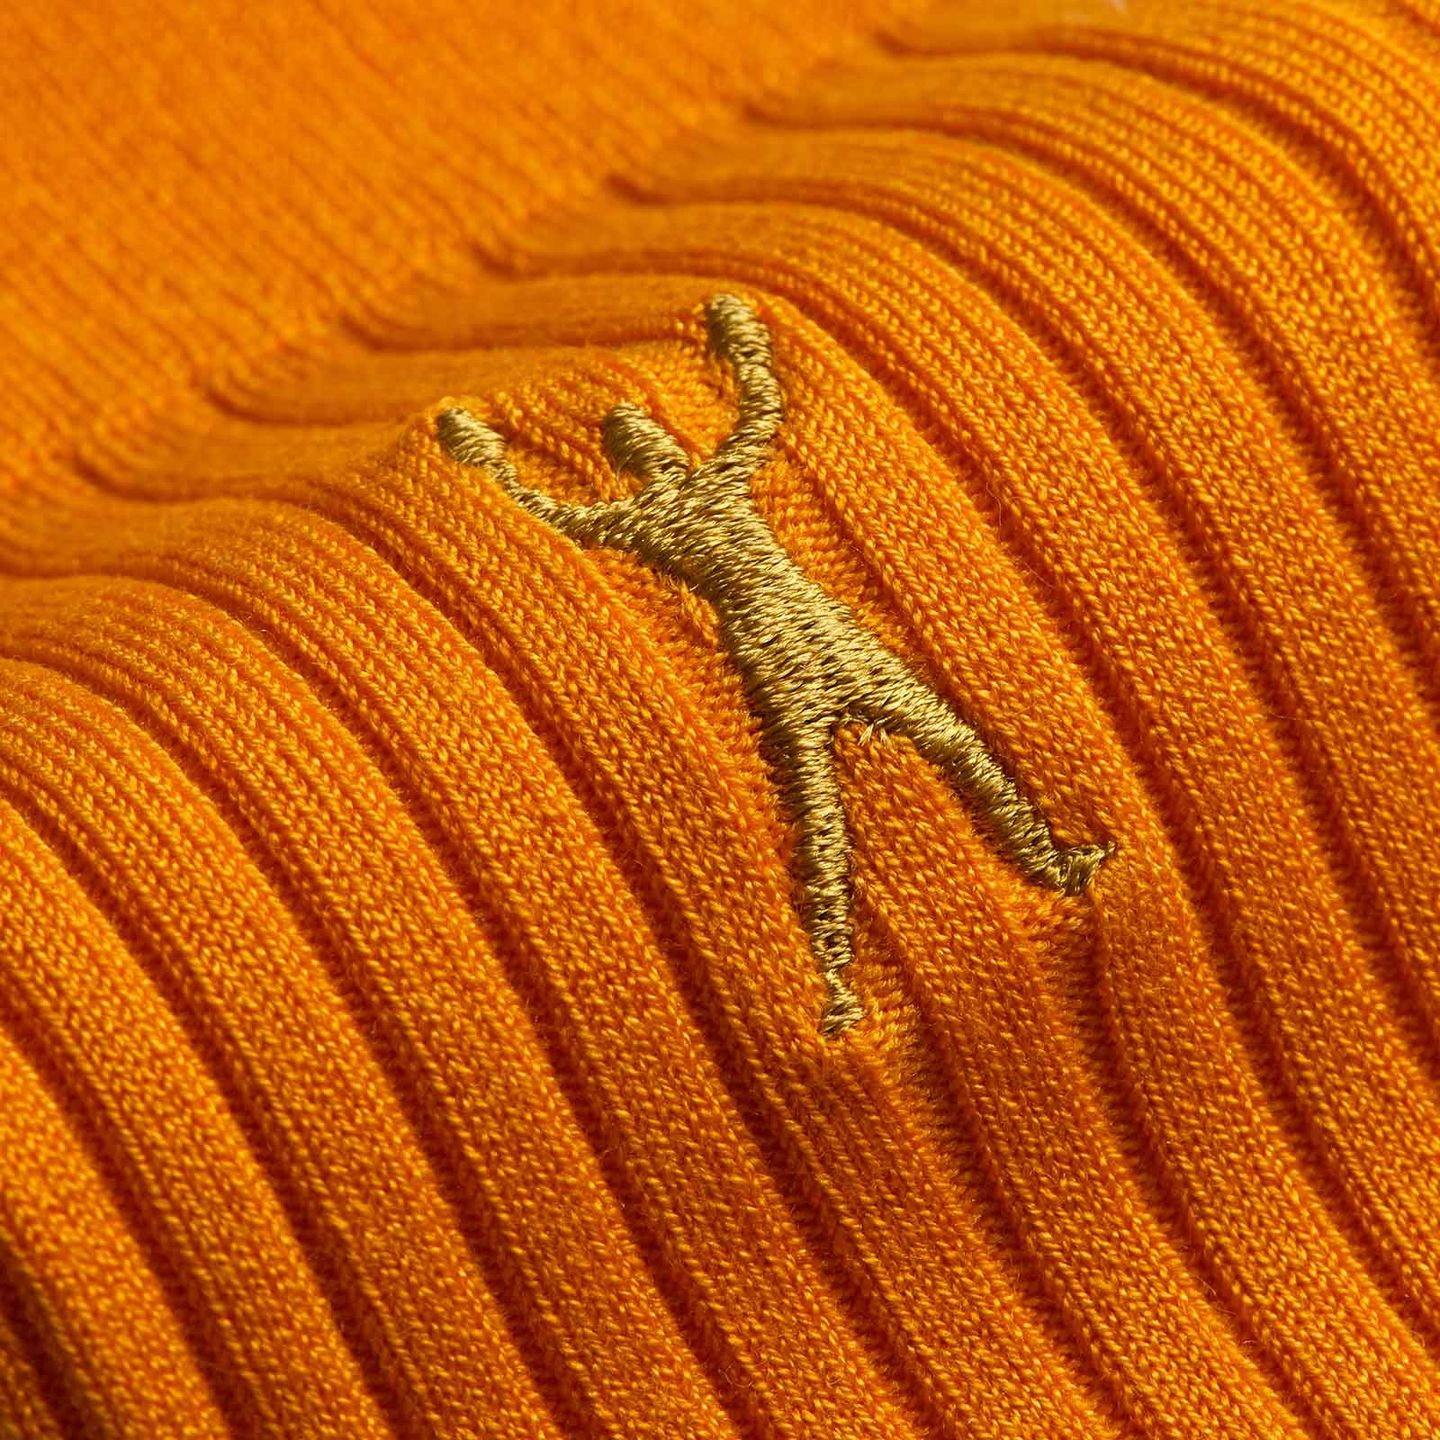 Close up of the gold logo on the saffron Muhammad Ali Collection sock